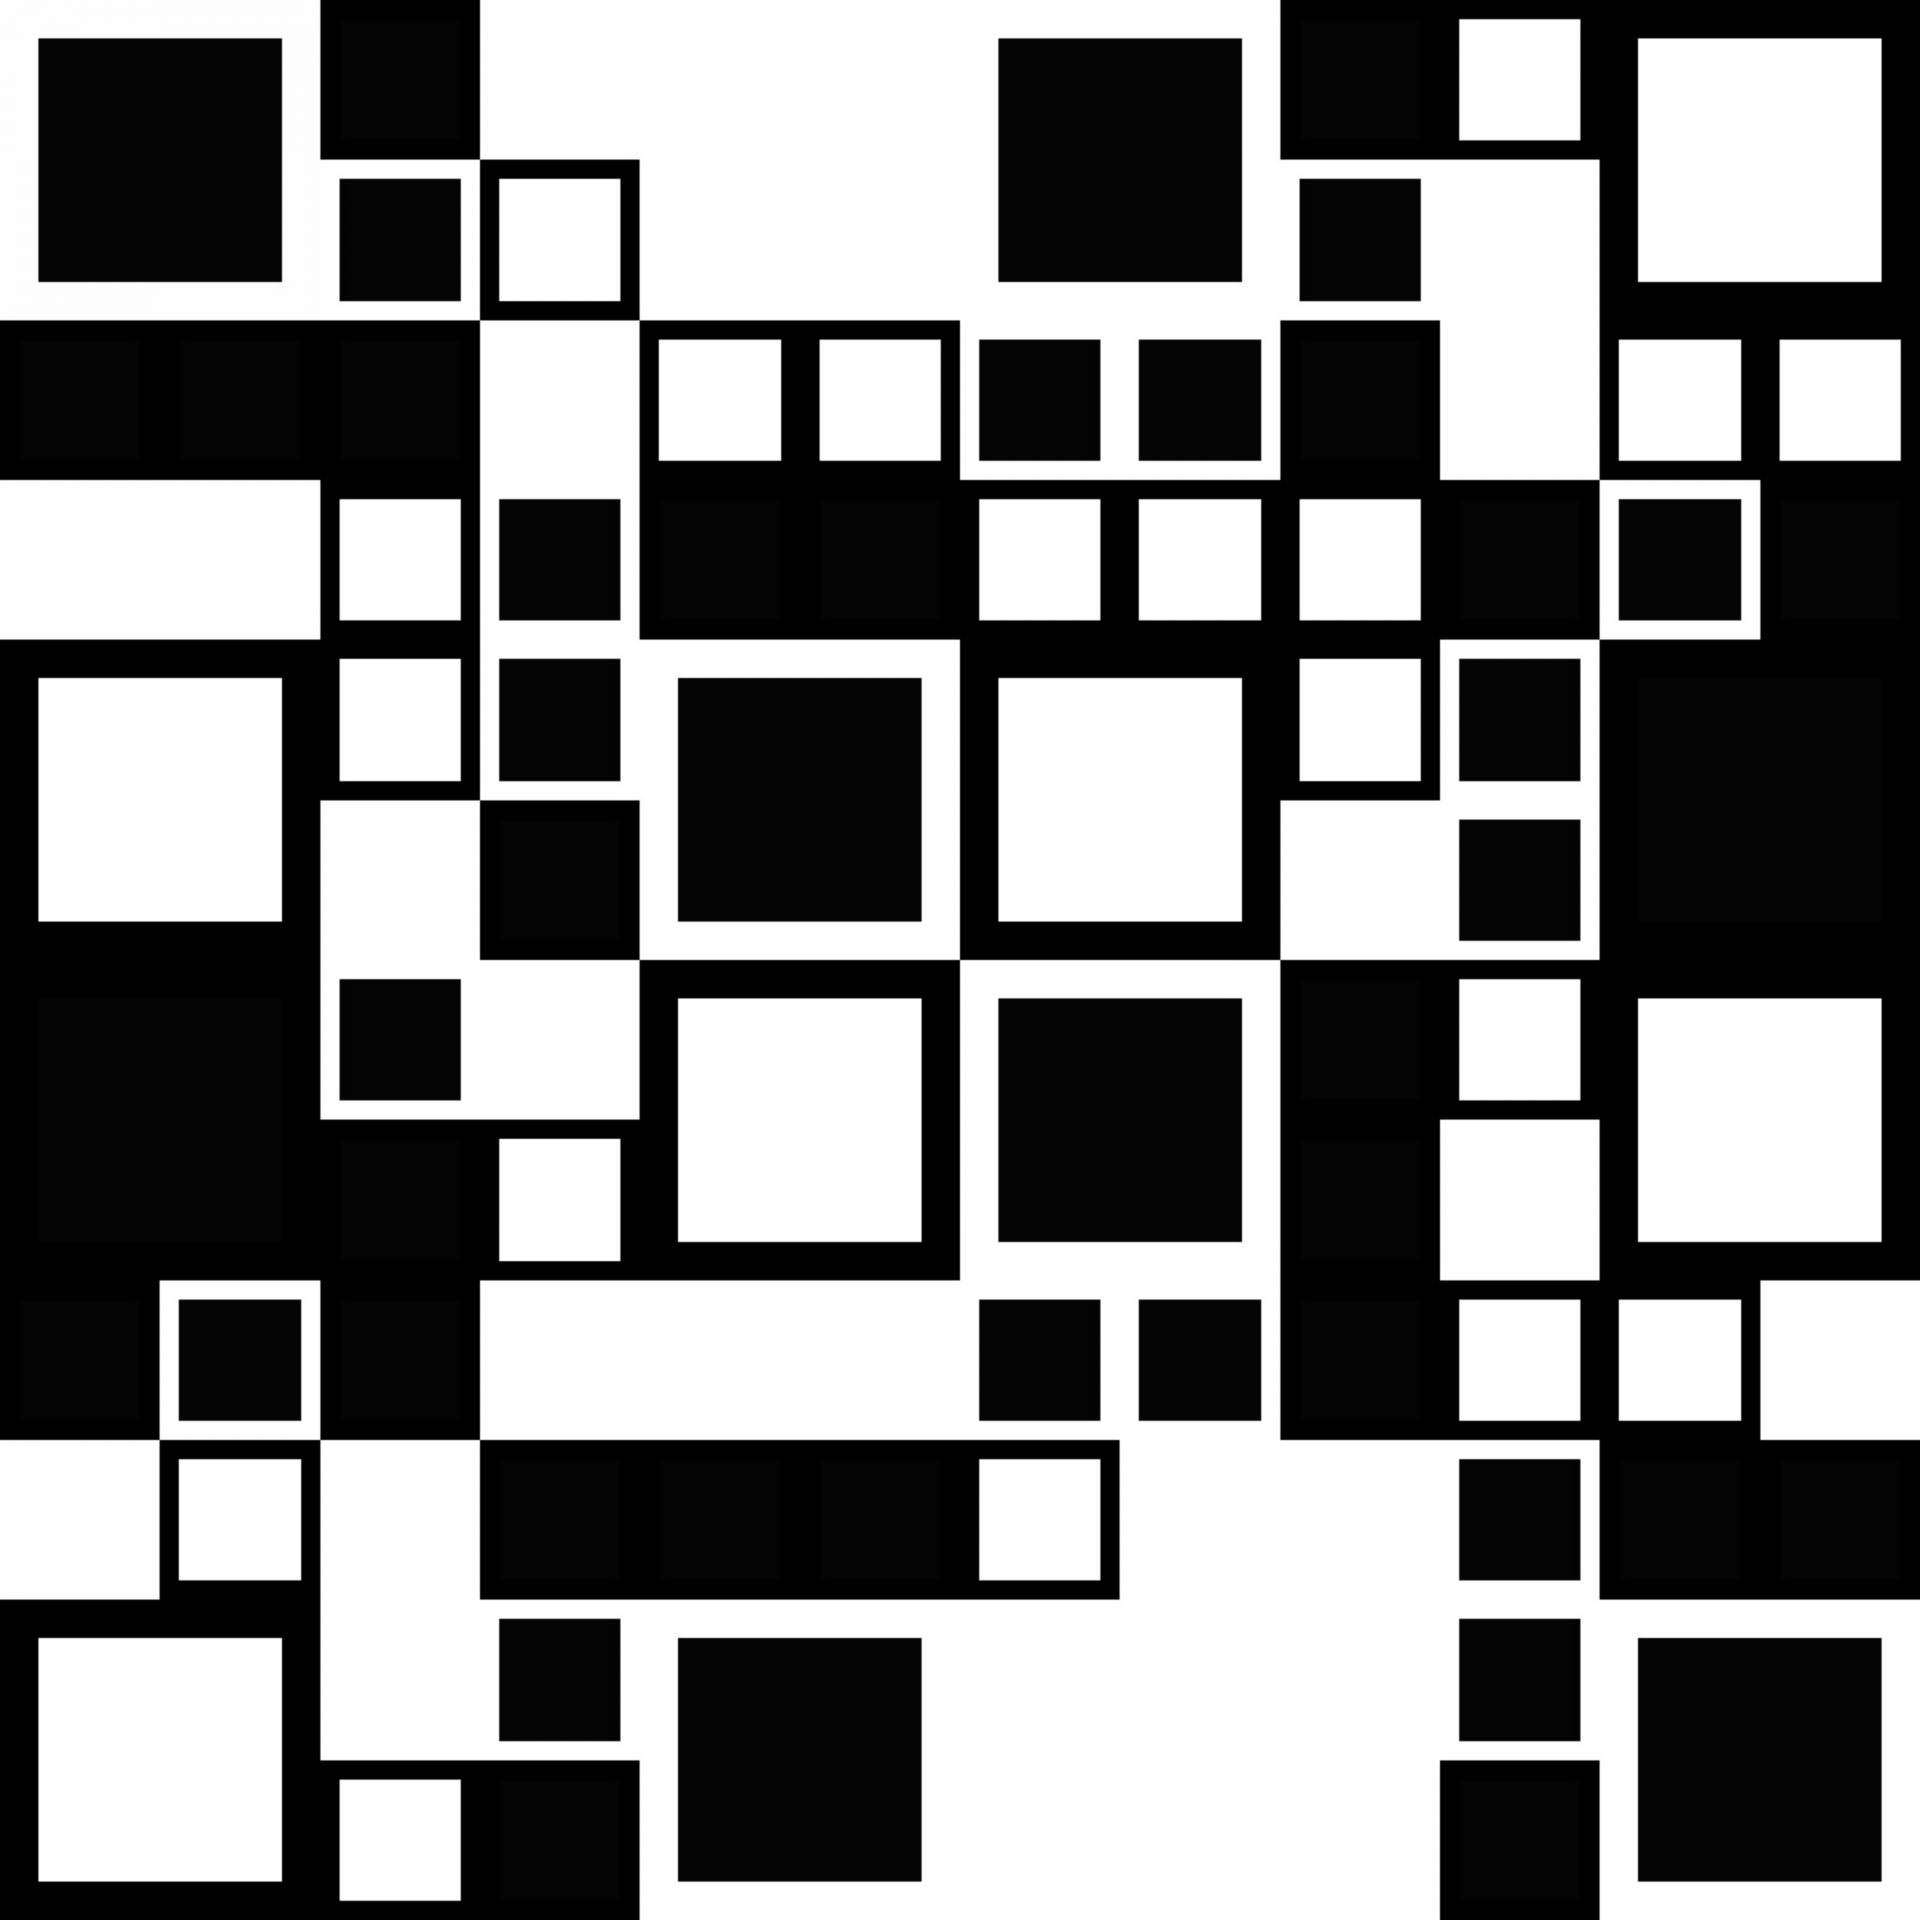 Caption: Captivating Abstract Pattern of Black and White Squares Wallpaper